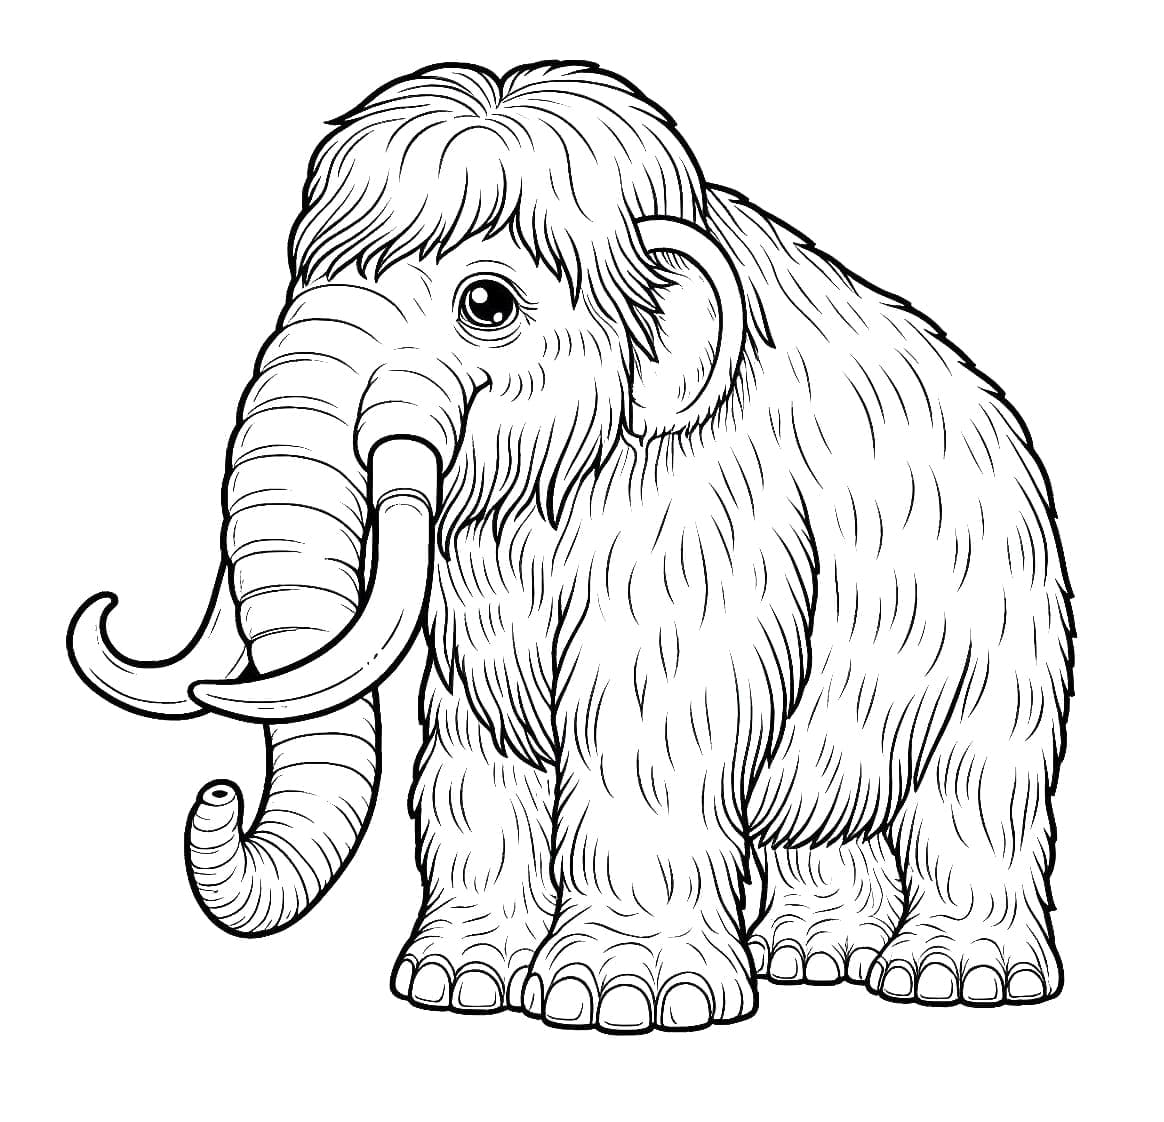 Bébé Mammouth coloring page